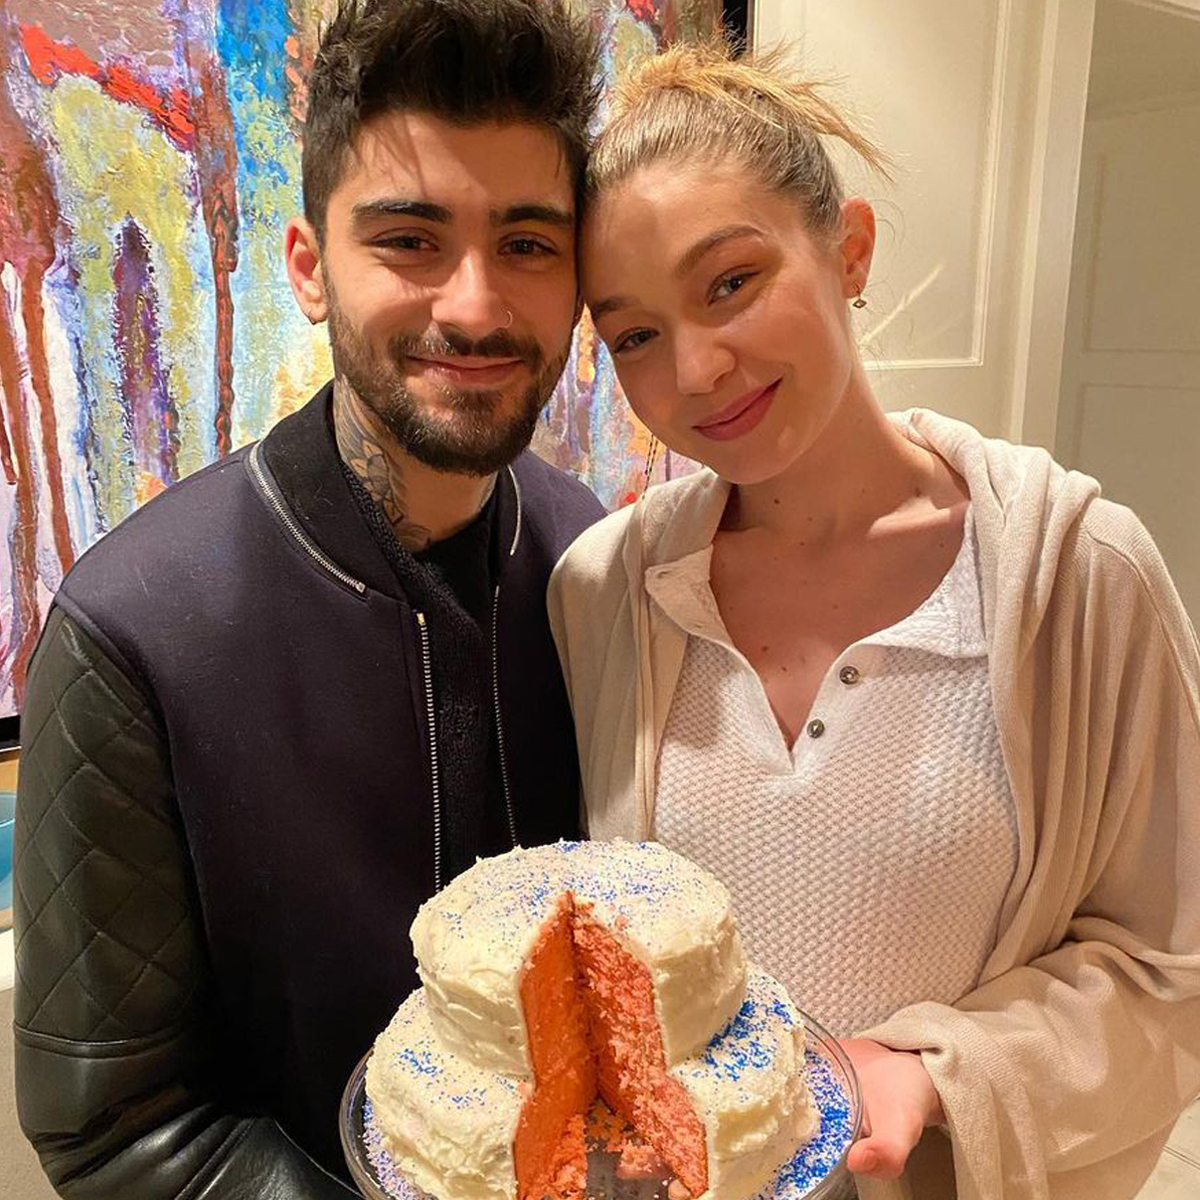 Gigi Hadid Is 'Glad to Be a Young Mom' to Daughter Khai